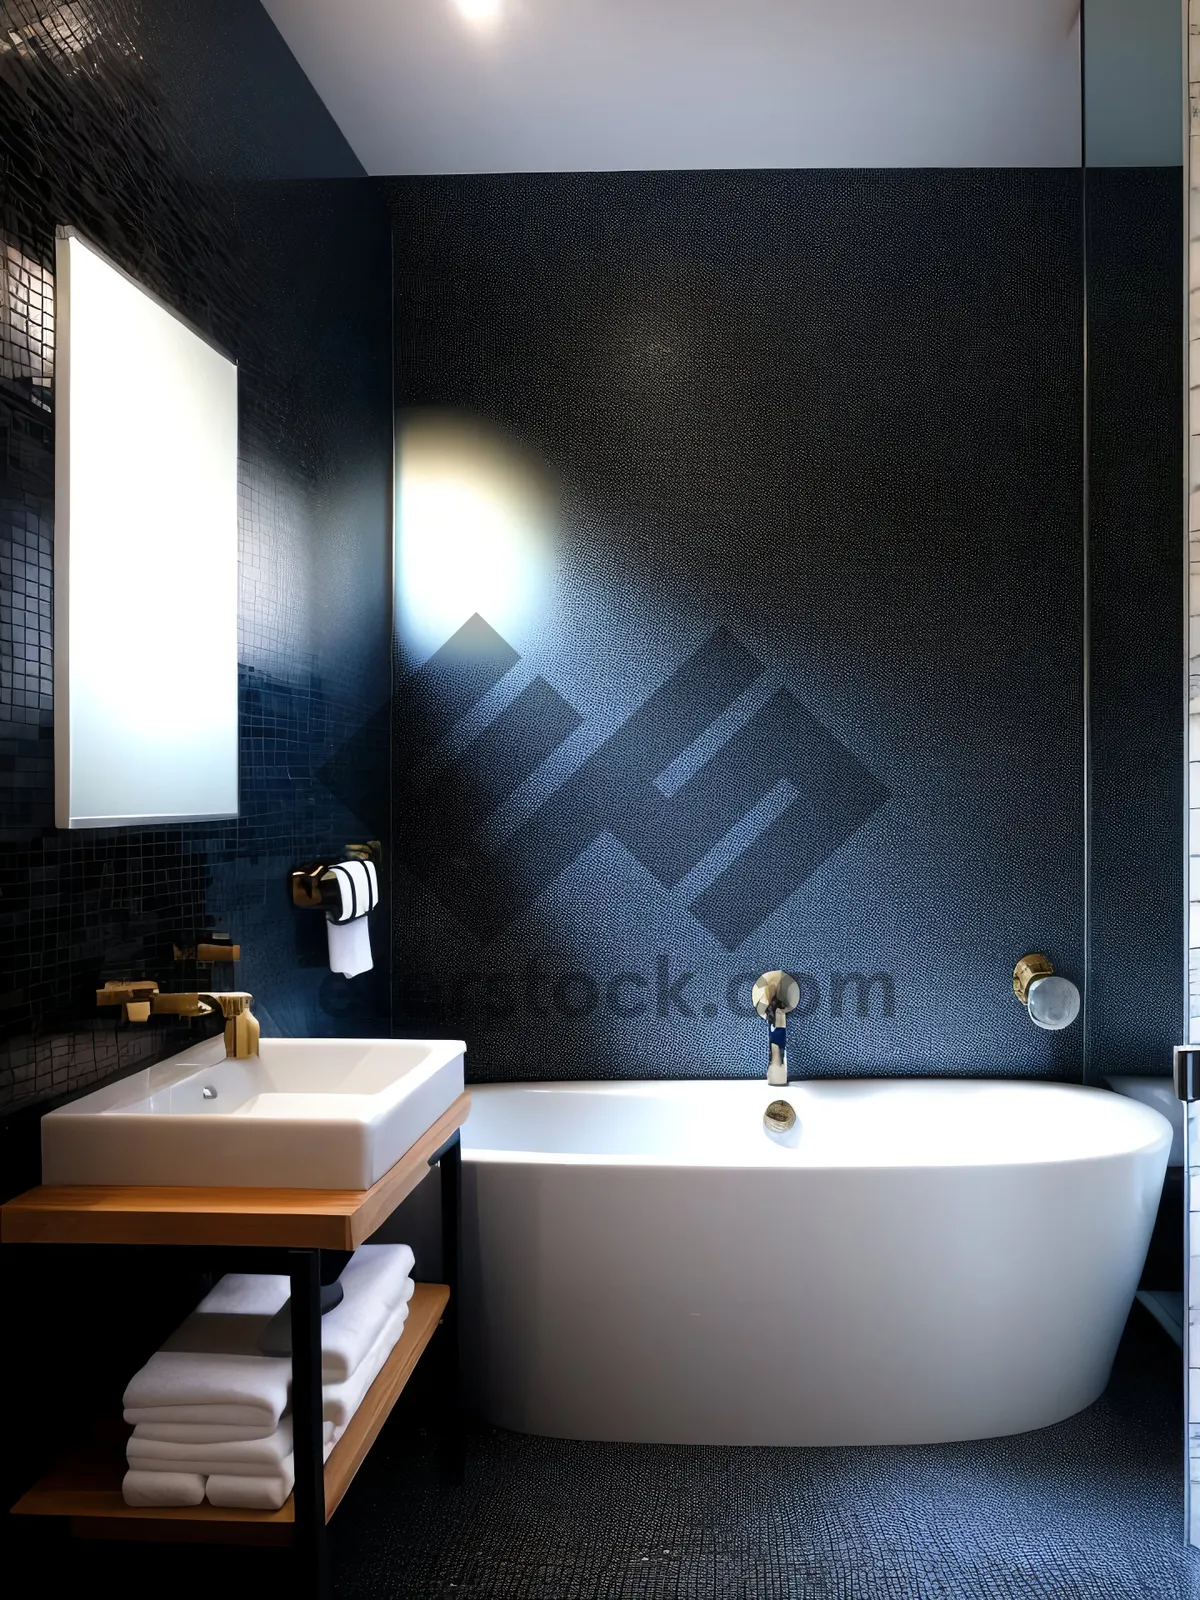 Picture of Luxurious Modern Bathroom with Glass Vessel Sink